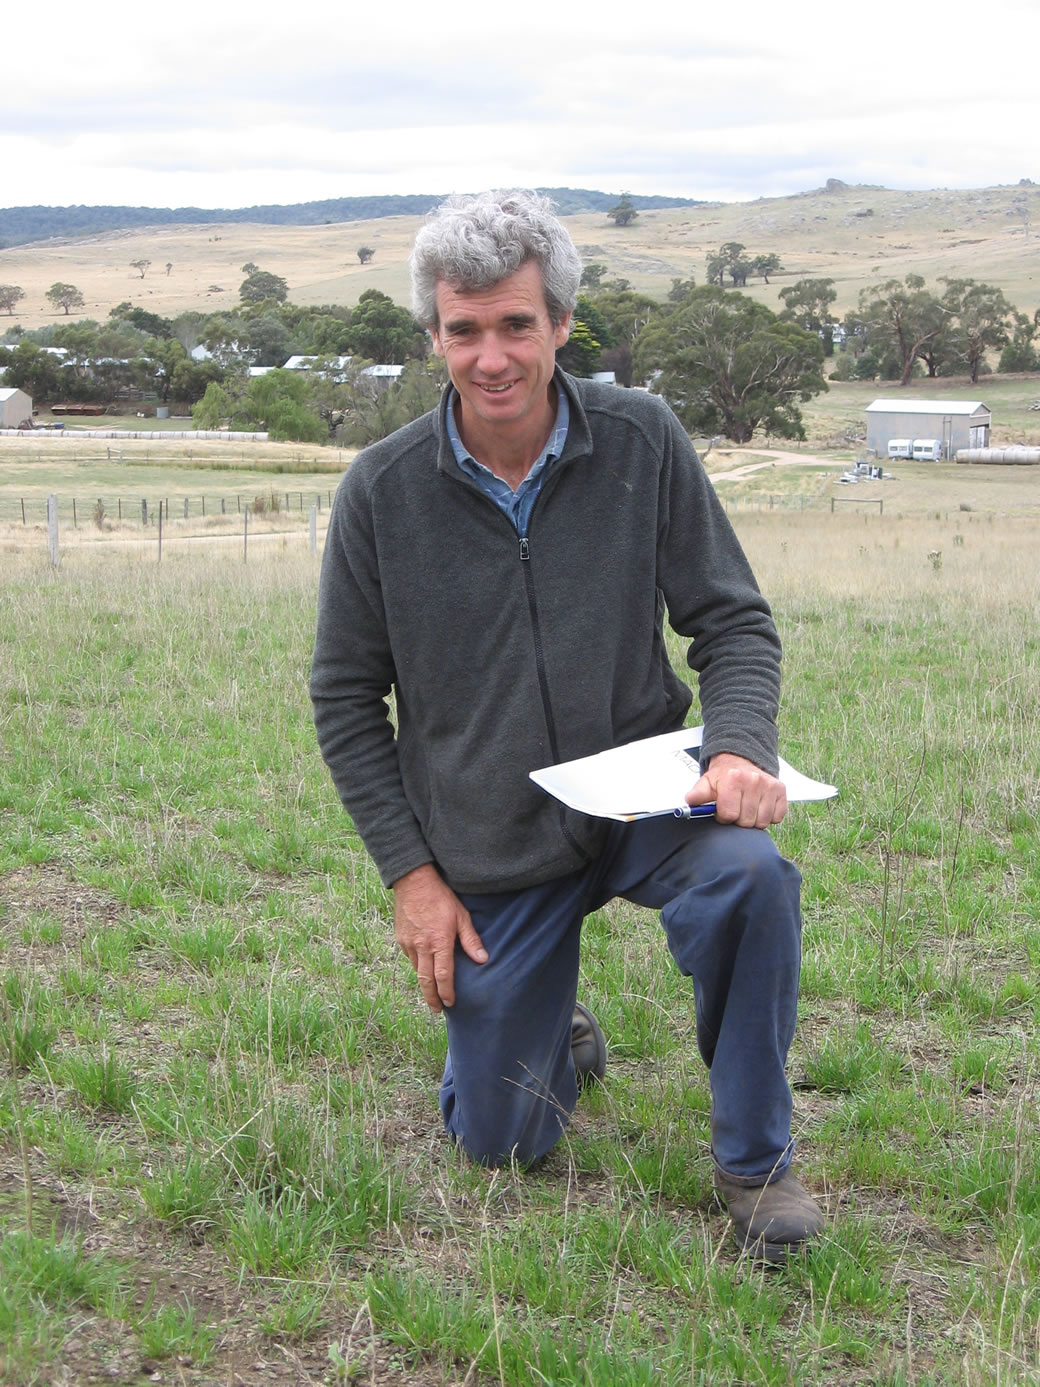 Michael O’Sullivan at the EverGraze Supporting Site assessing the Banquet II perennial ryegrass pasture.